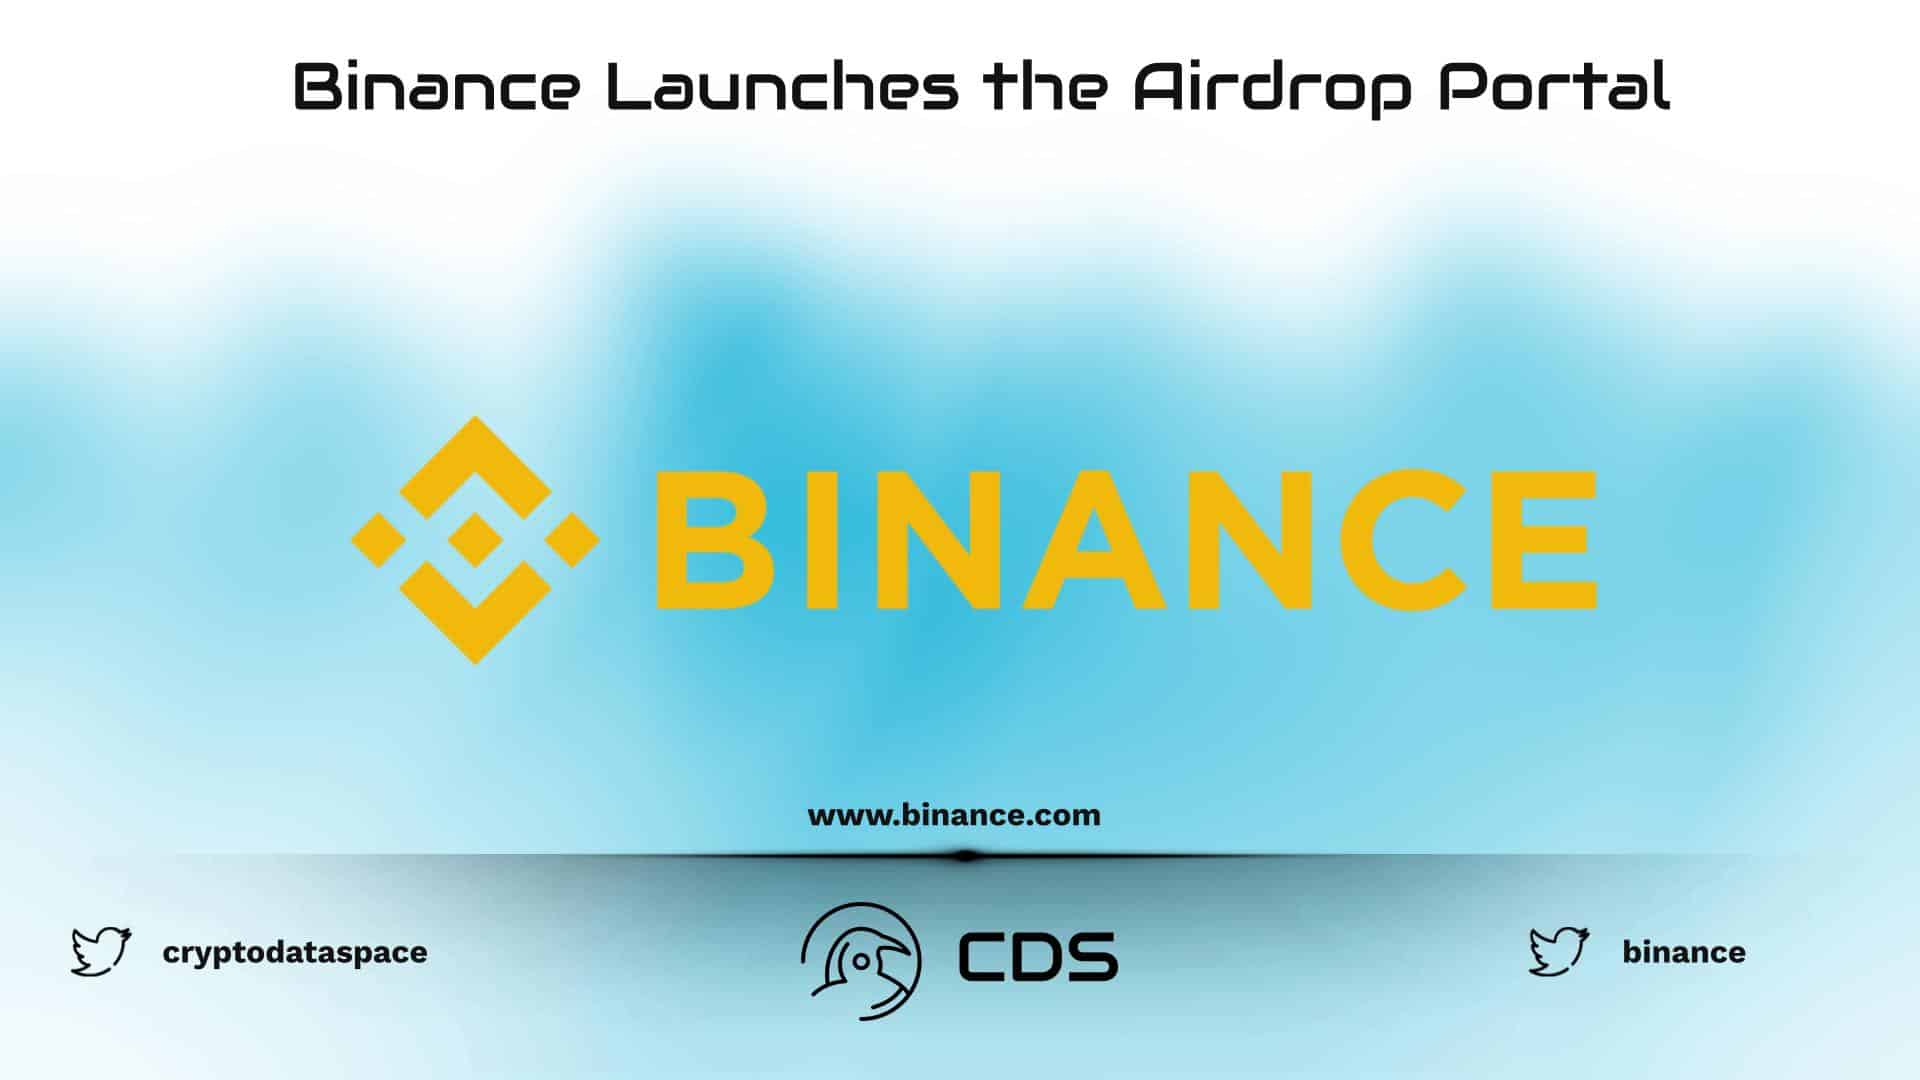 Binance Launches the Airdrop Portal